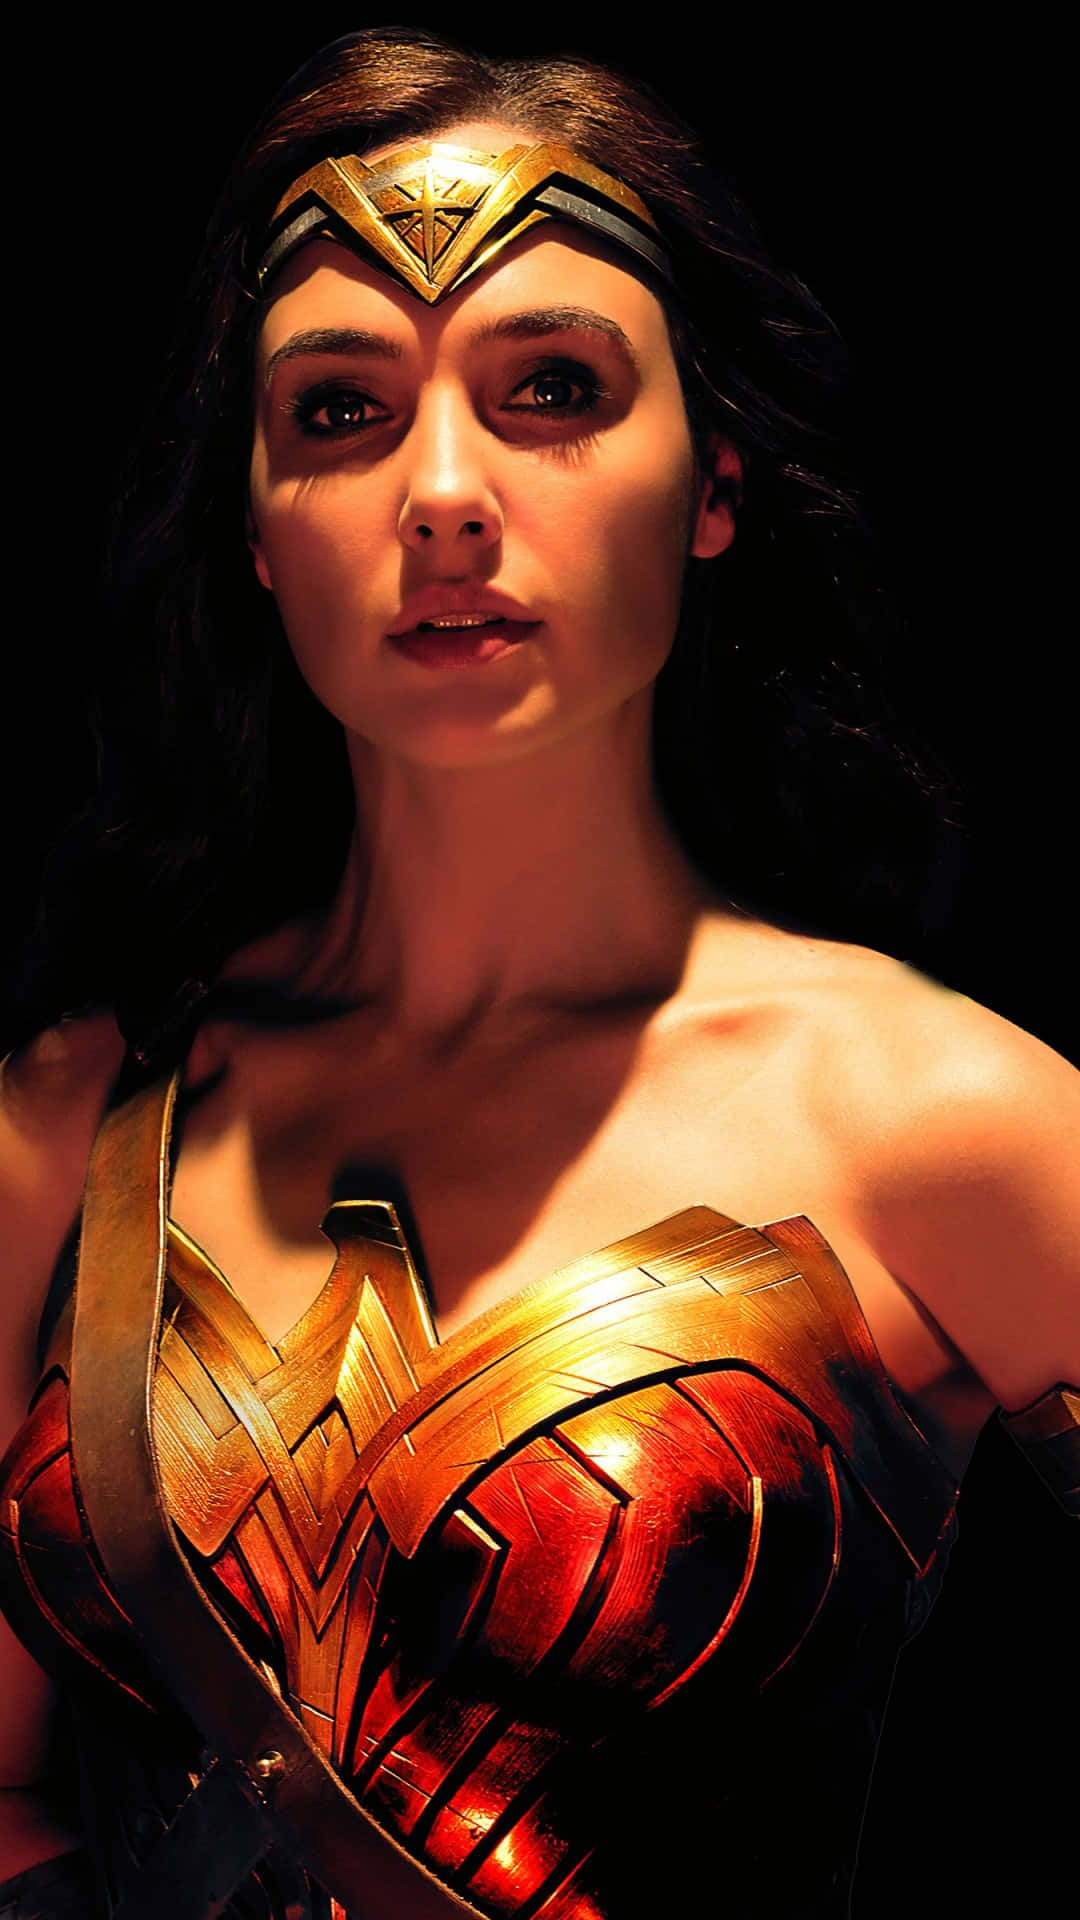 Wonder Woman stands tall and proud, never to kneel before her enemies.